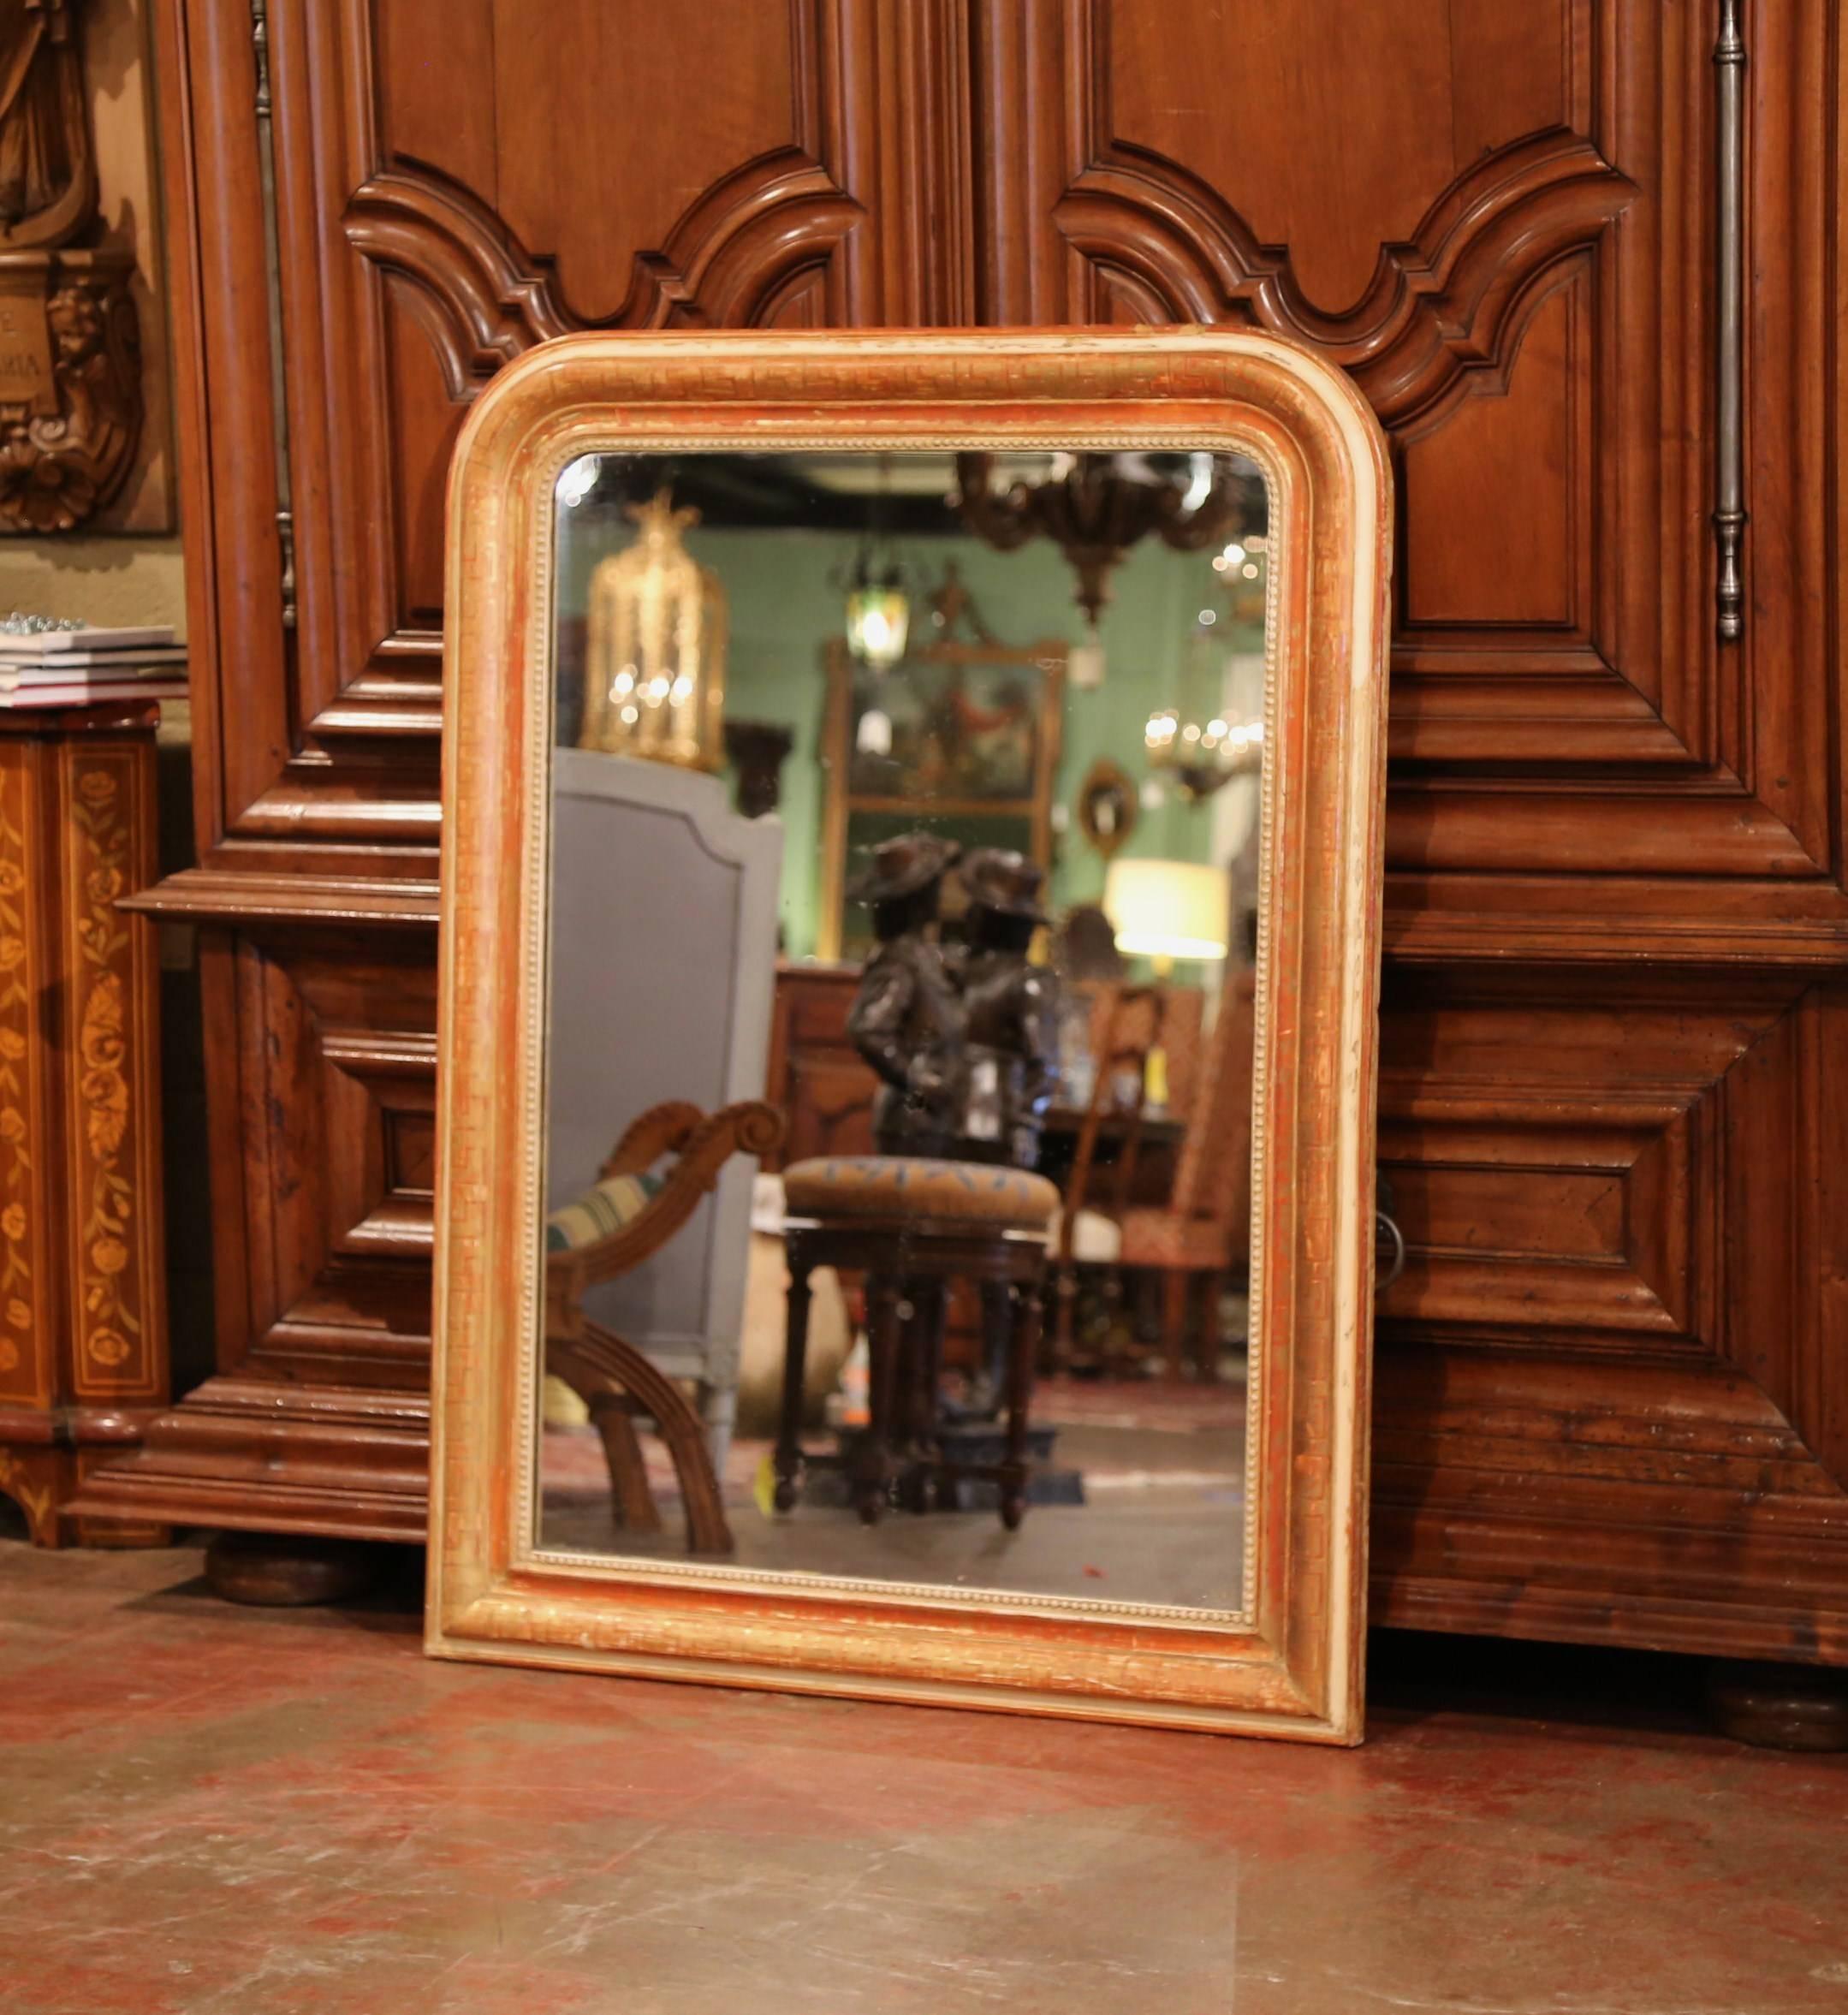 This elegant antique wall hanging mirror was crafted in France, circa 1860. The traditional Louis Philippe mirror features a two-tone red and gold leaf finish with white gesso, further embellished by engraved Greek key motif around the frame. The